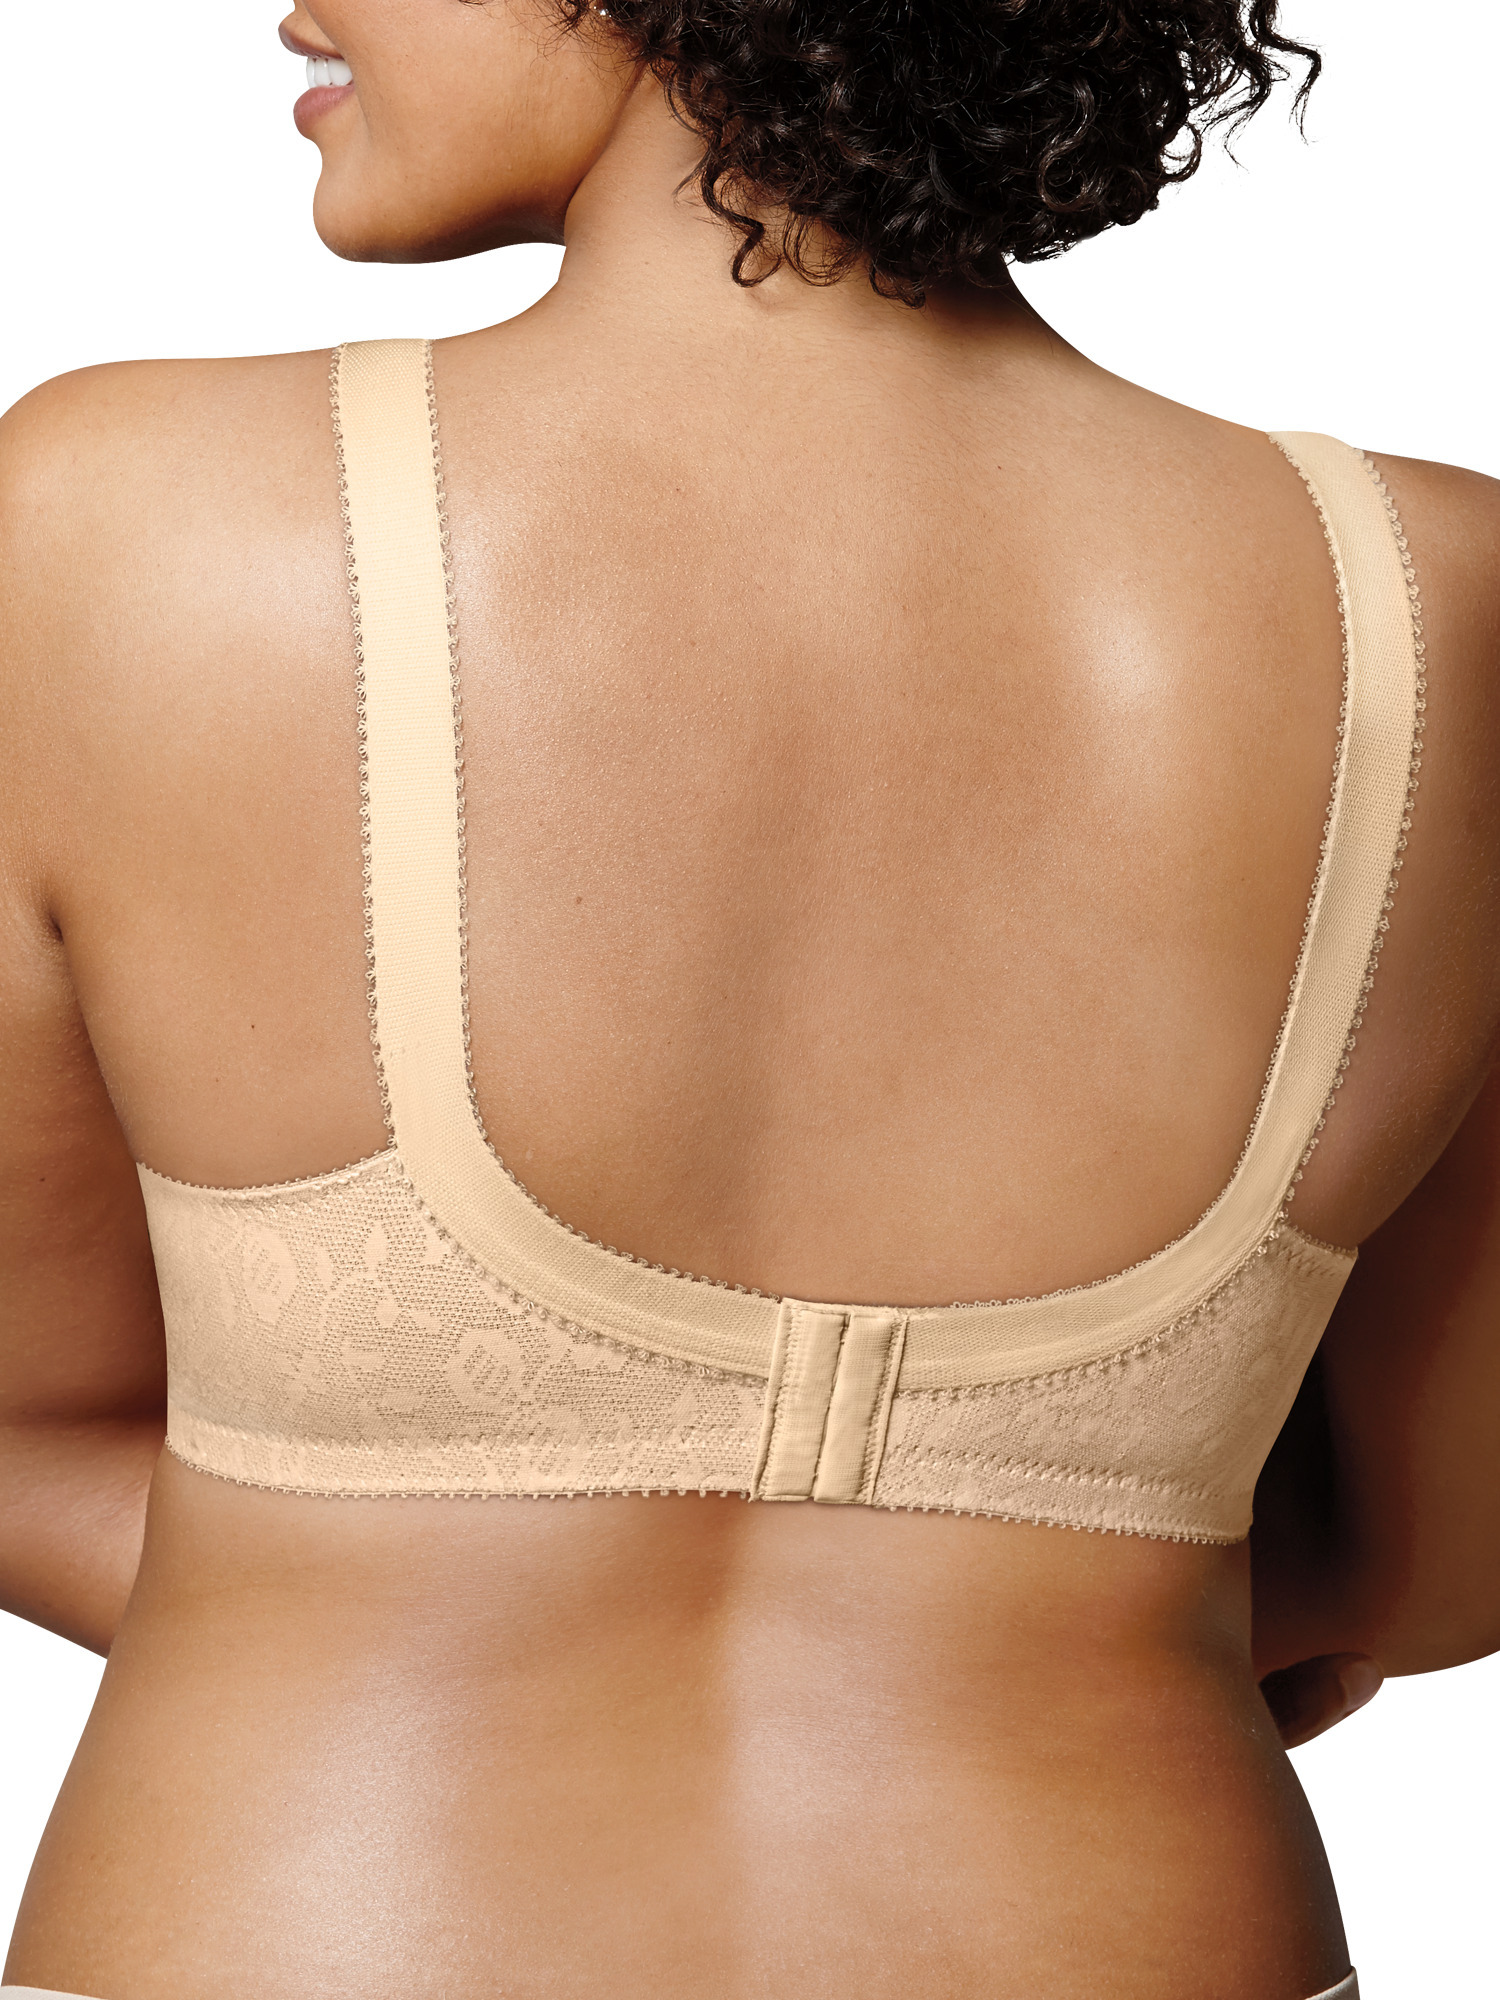 Playtex Bra 0020 Size 34c 18 Hour Full Coverage Beige Wire for sale online